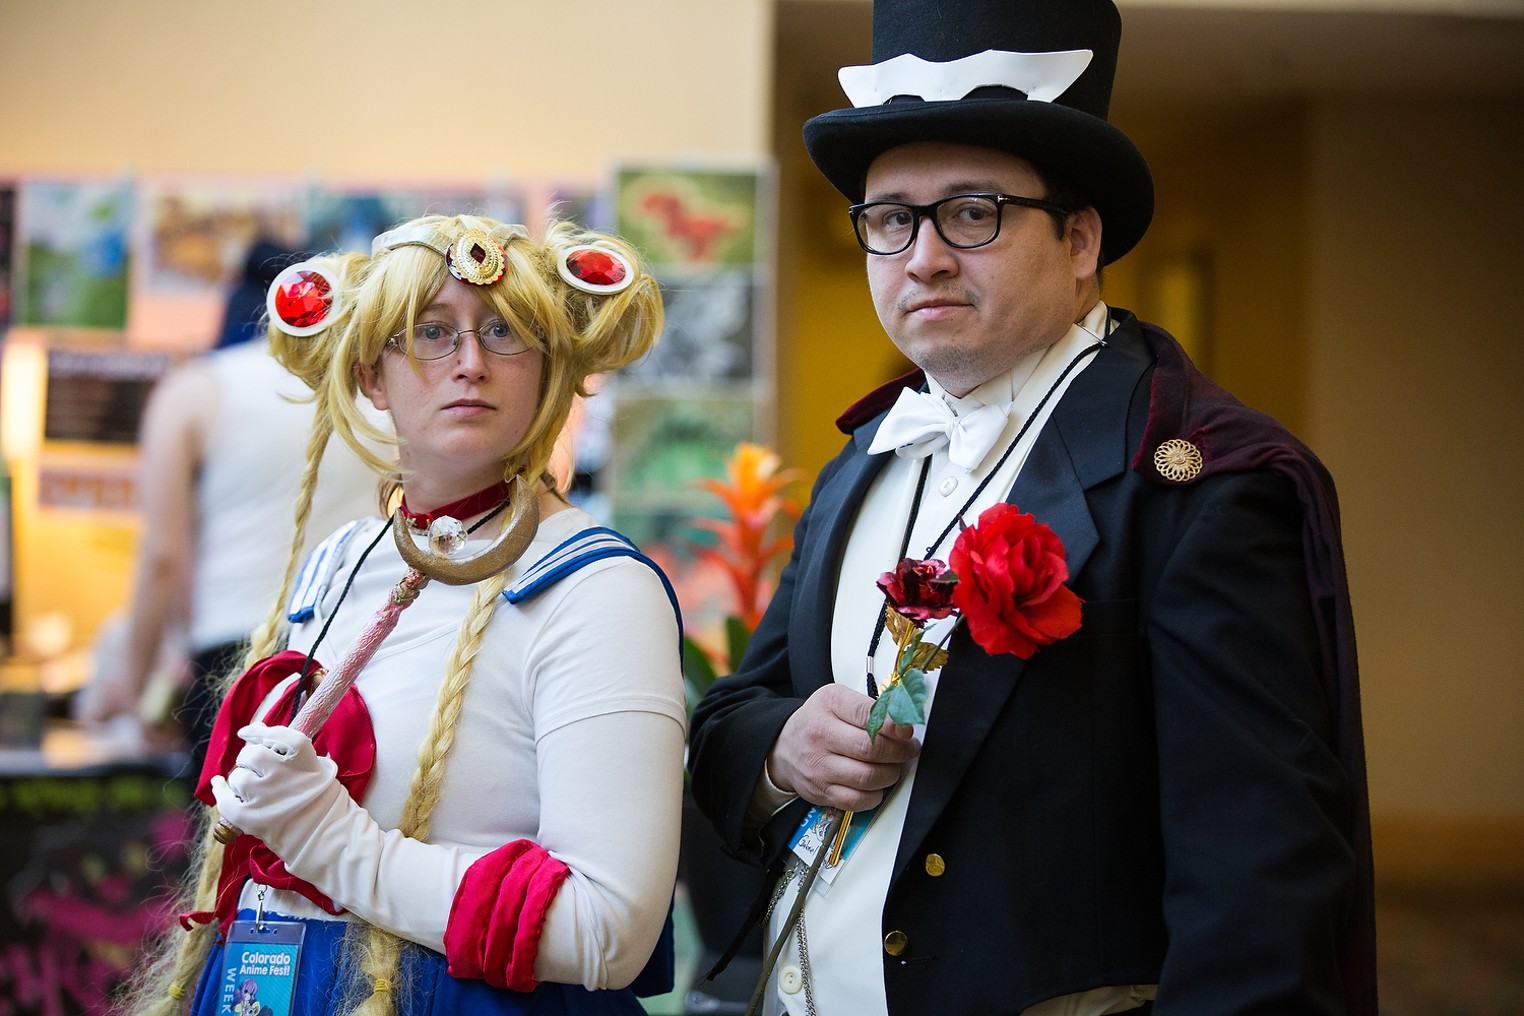 Colorful Characters of the Colorado Anime Fest  Denver  Denver Westword   The Leading Independent News Source in Denver Colorado